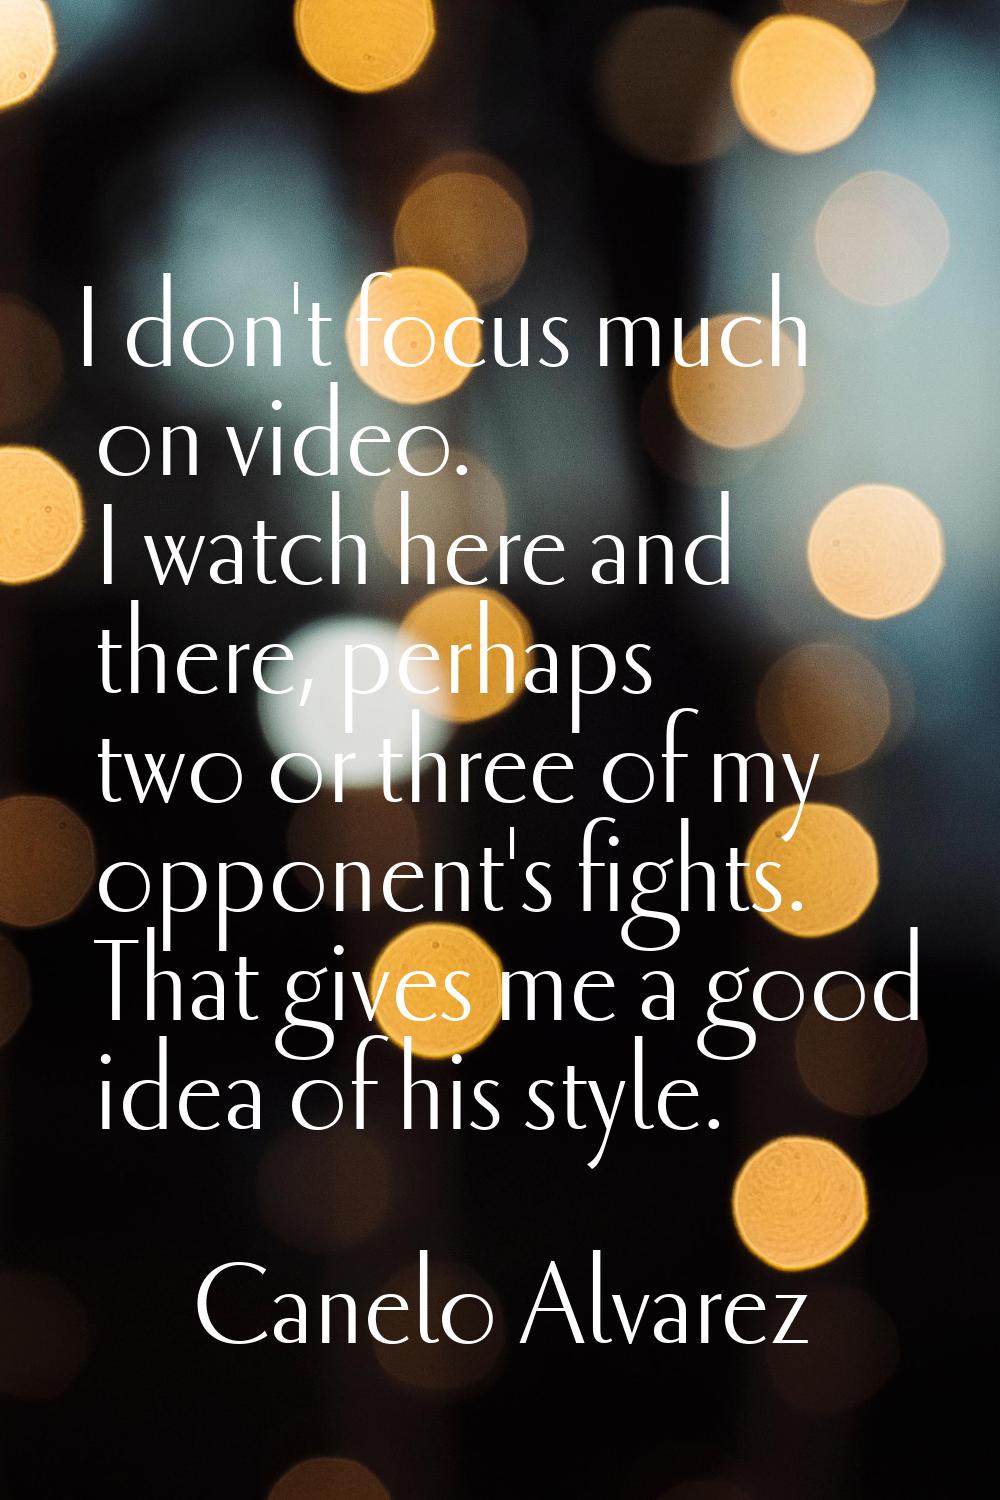 I don't focus much on video. I watch here and there, perhaps two or three of my opponent's fights. 